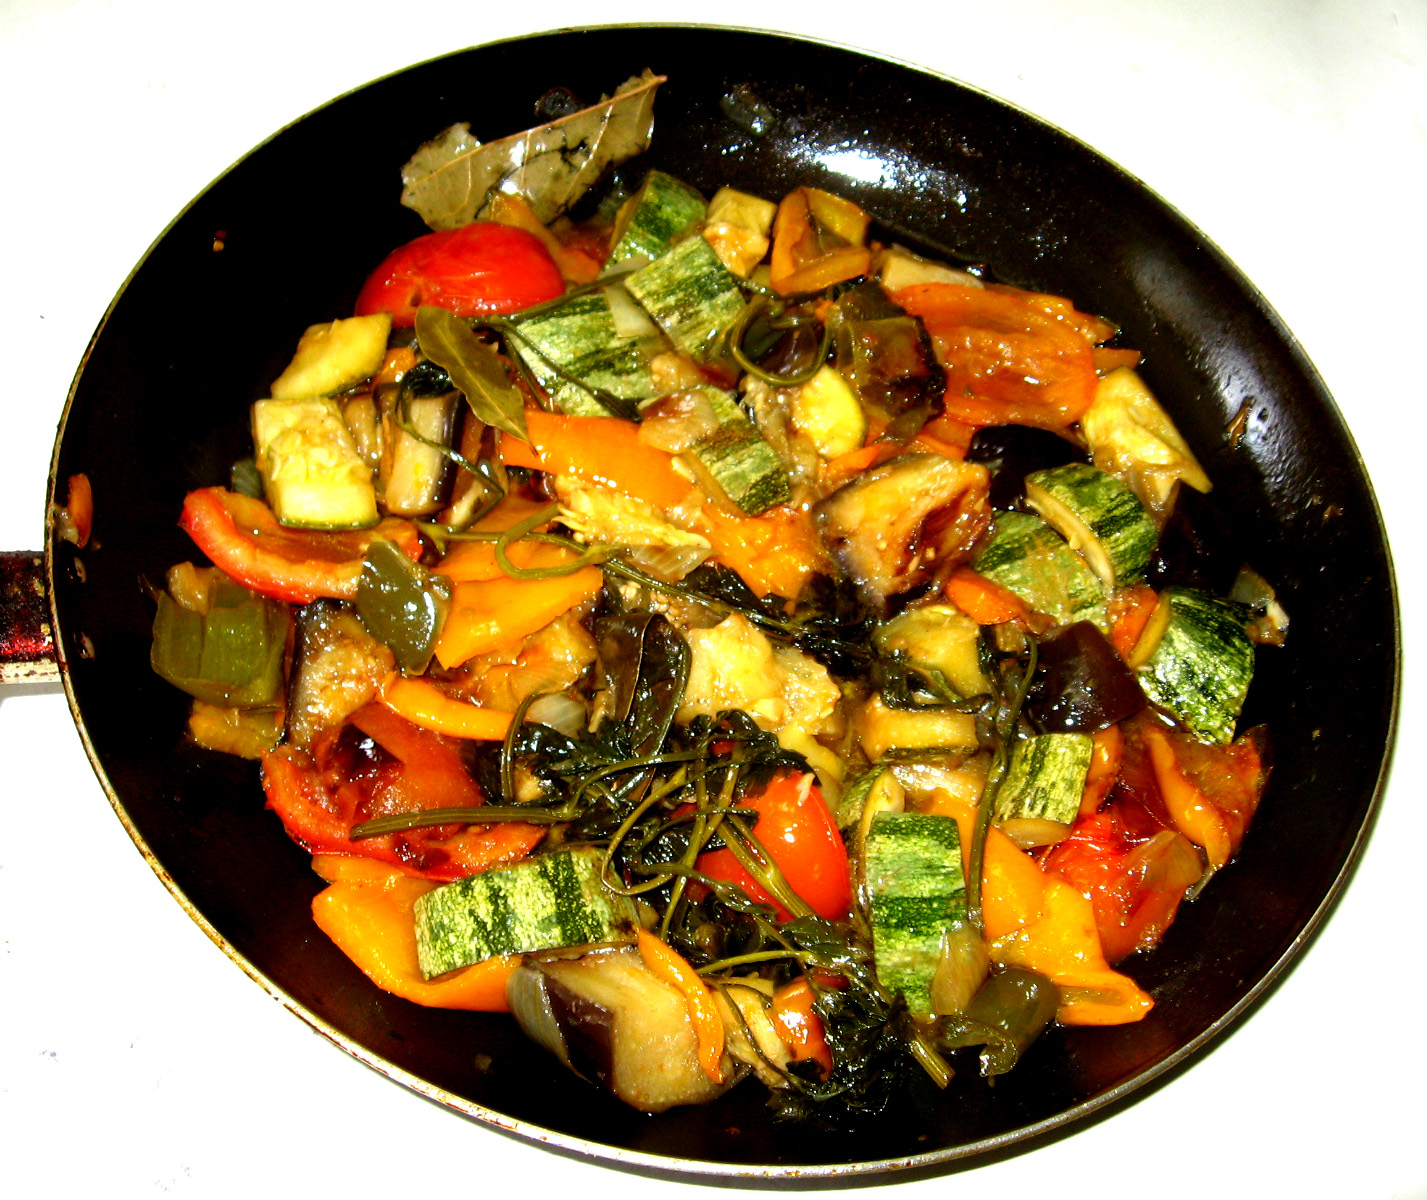 a set with a colorful stir fry of vegetables